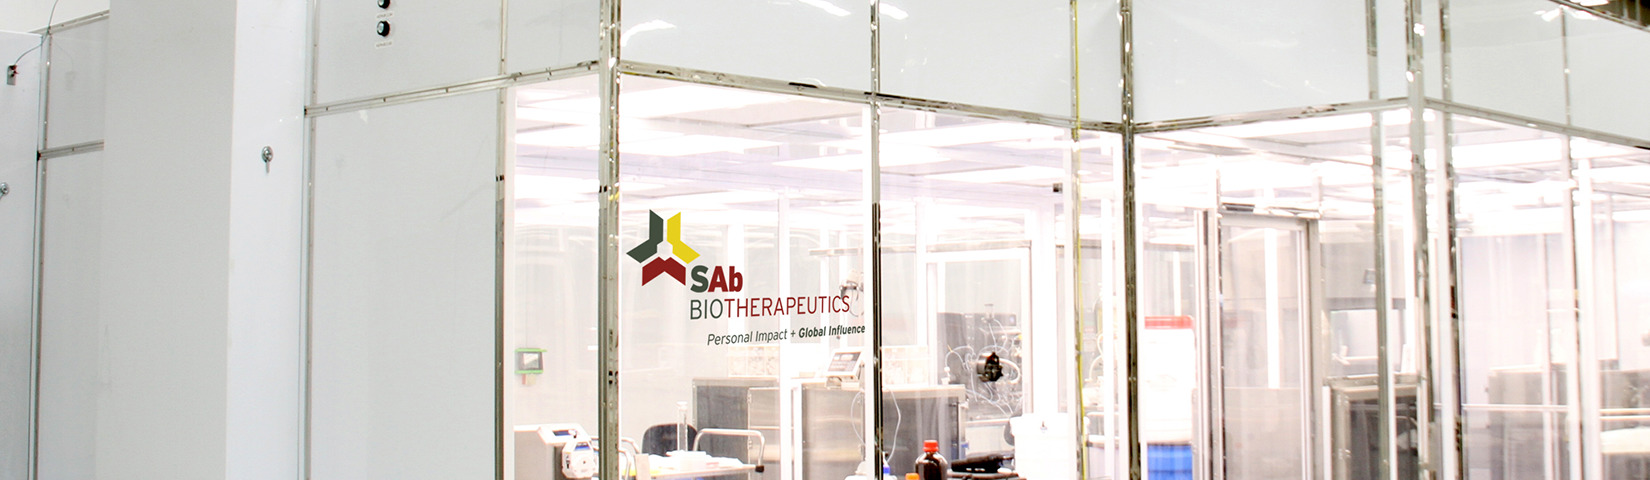 CSL Behring and SAB Biotherapeutics Join Forces to Deliver New Potential COVID-19 Therapeutic